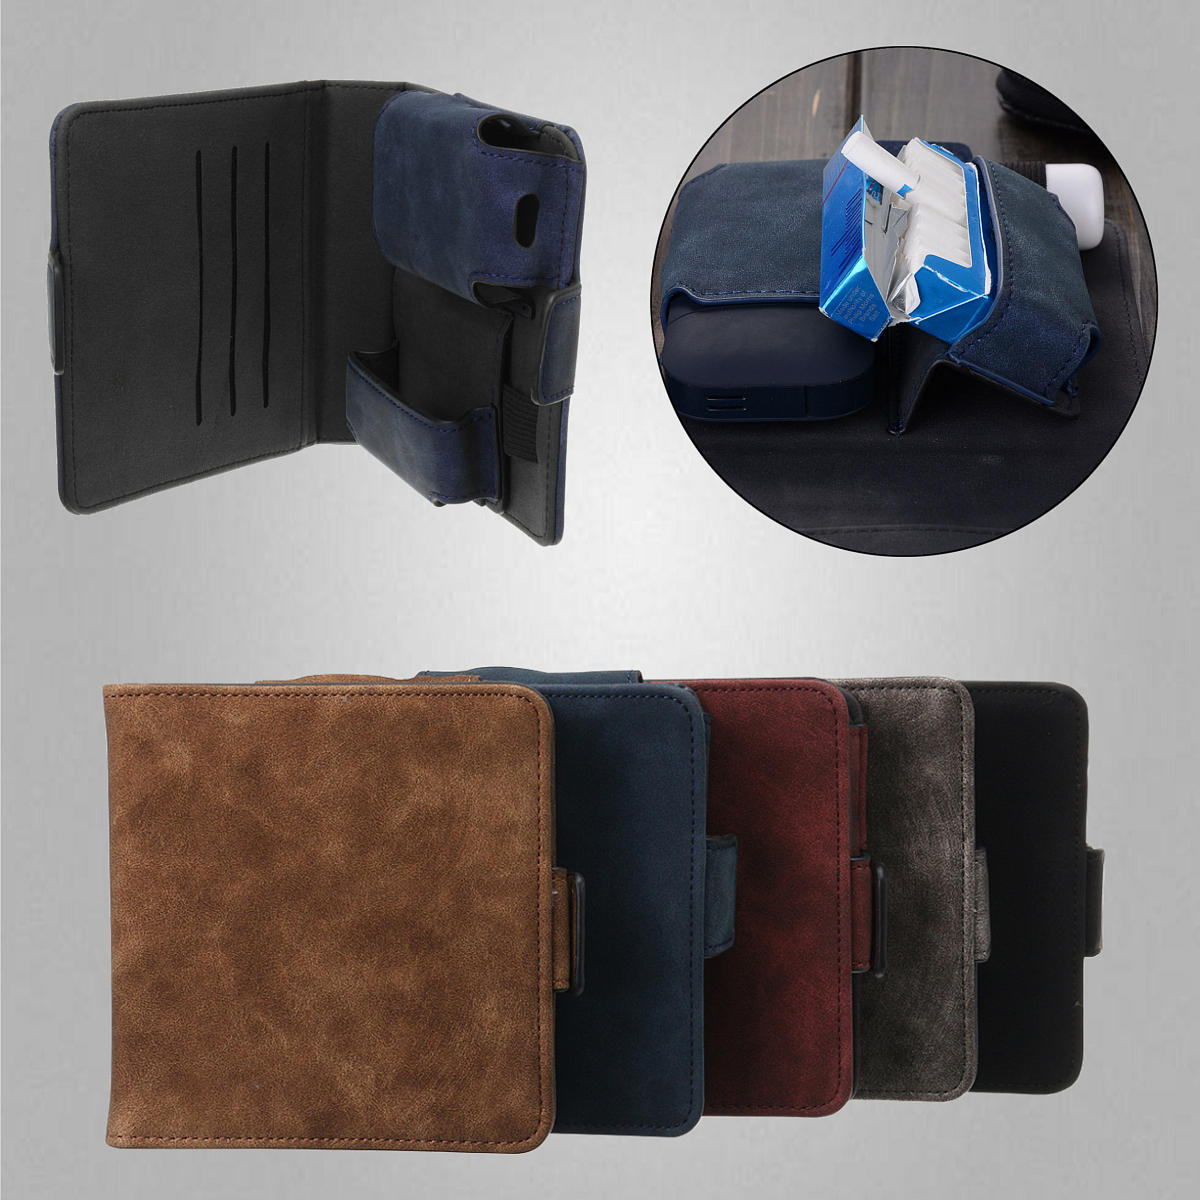 For Electronic Kit Luxury Leather Cards Case Box Holder Pouch Bag